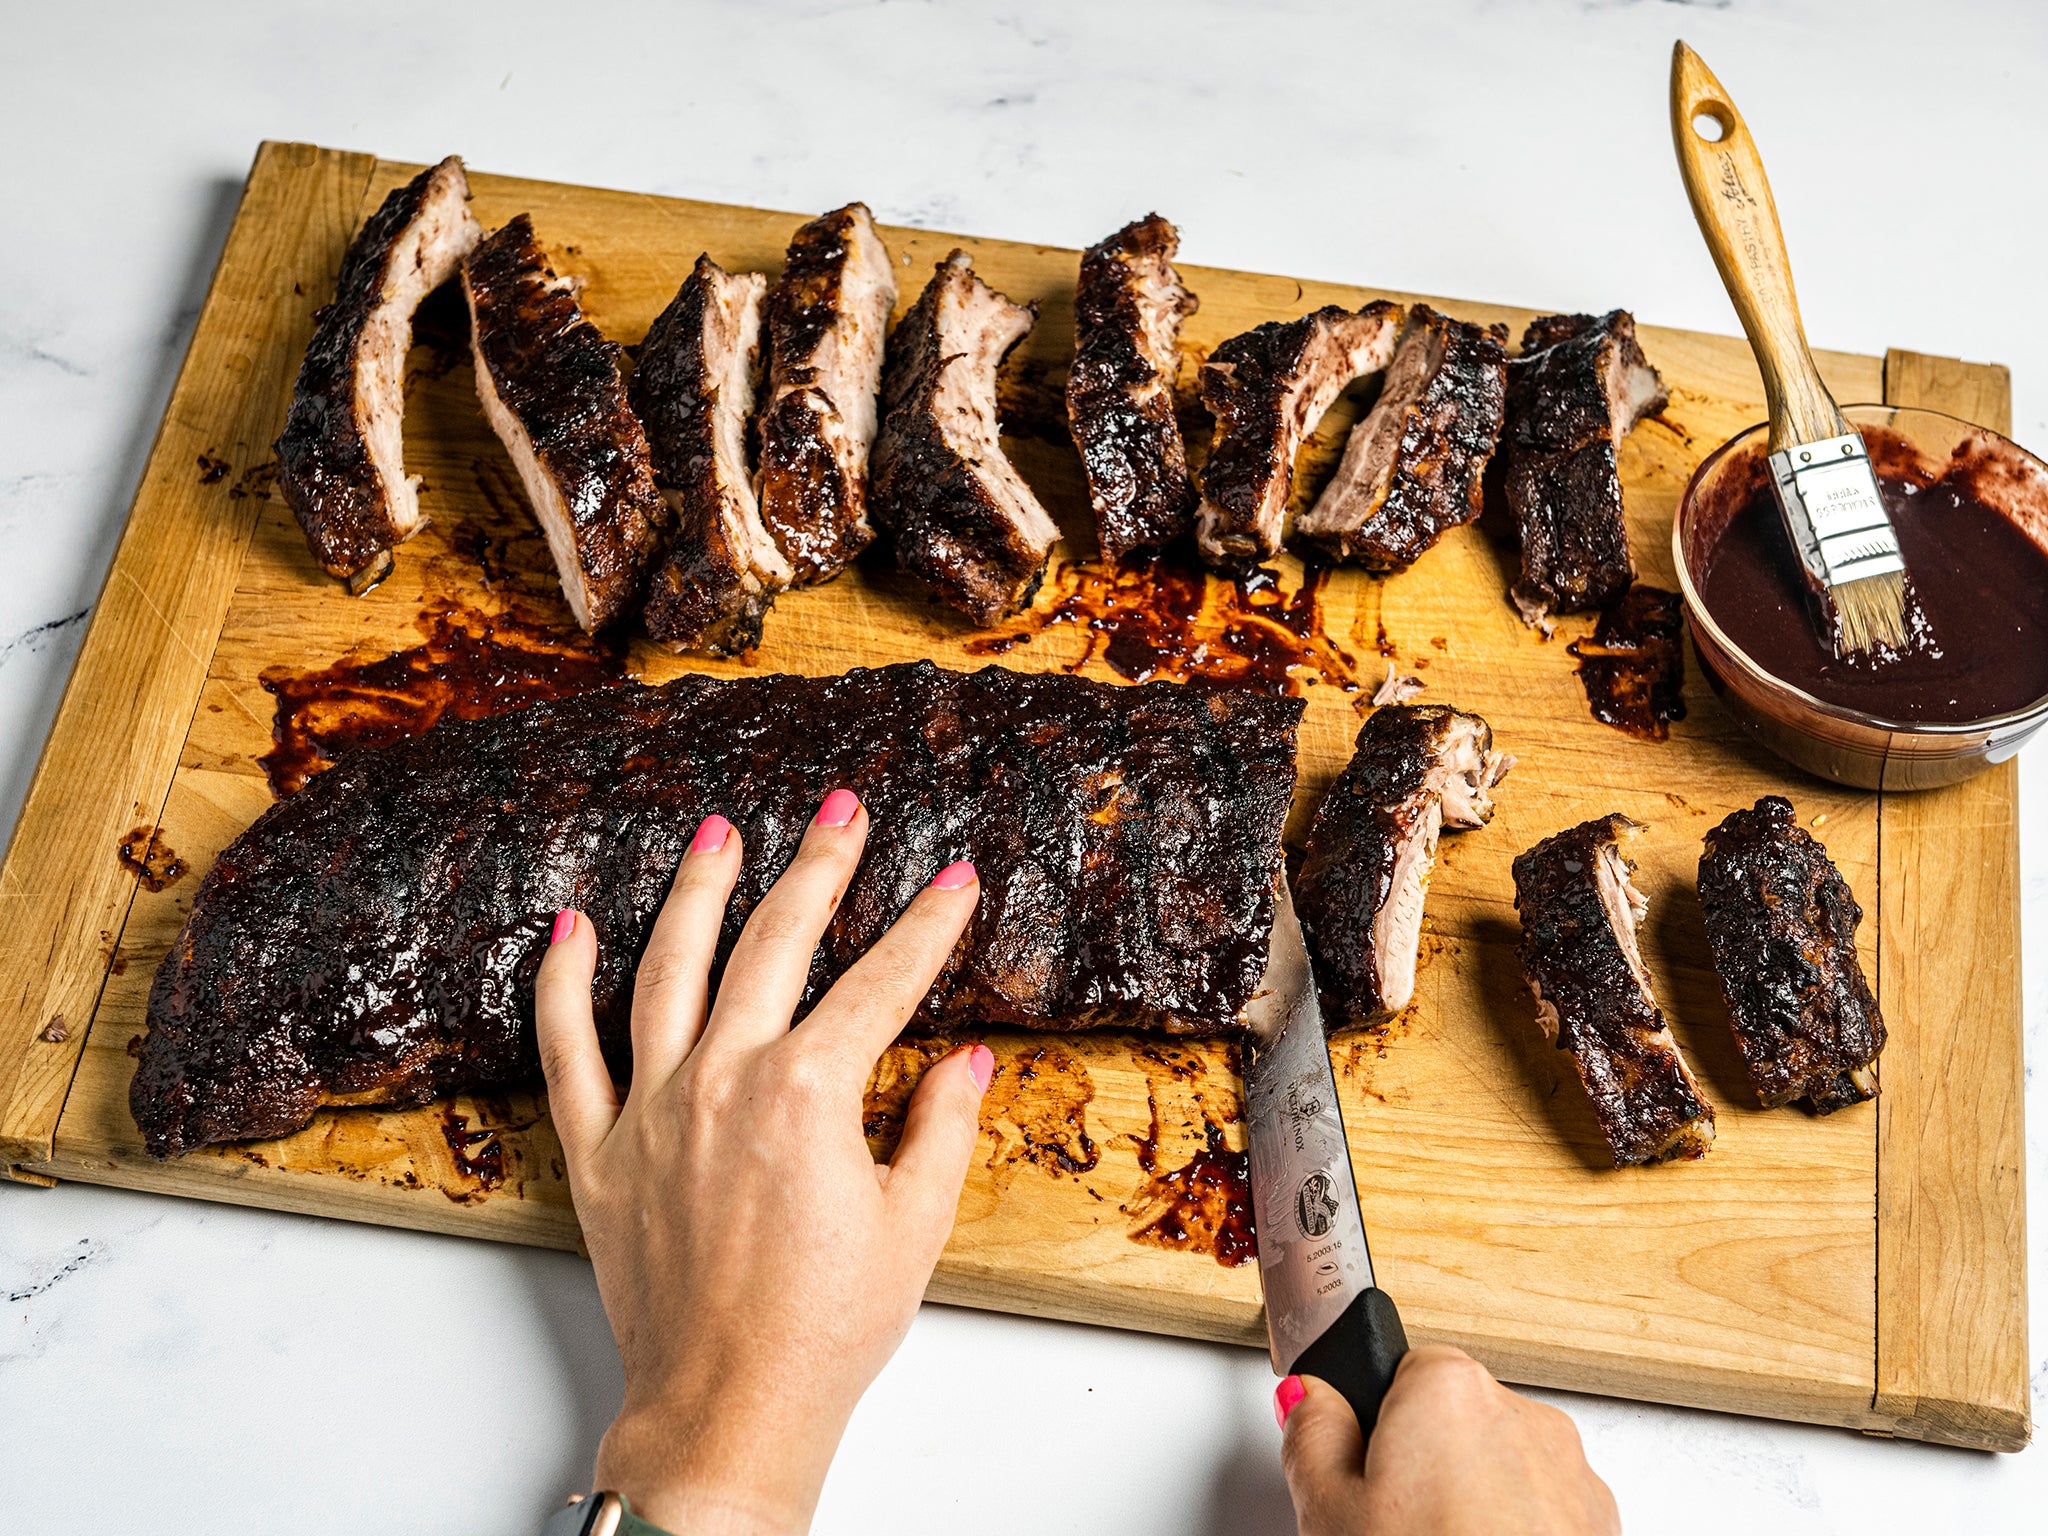 The tenderest and meatiest of all ribs are the baby back